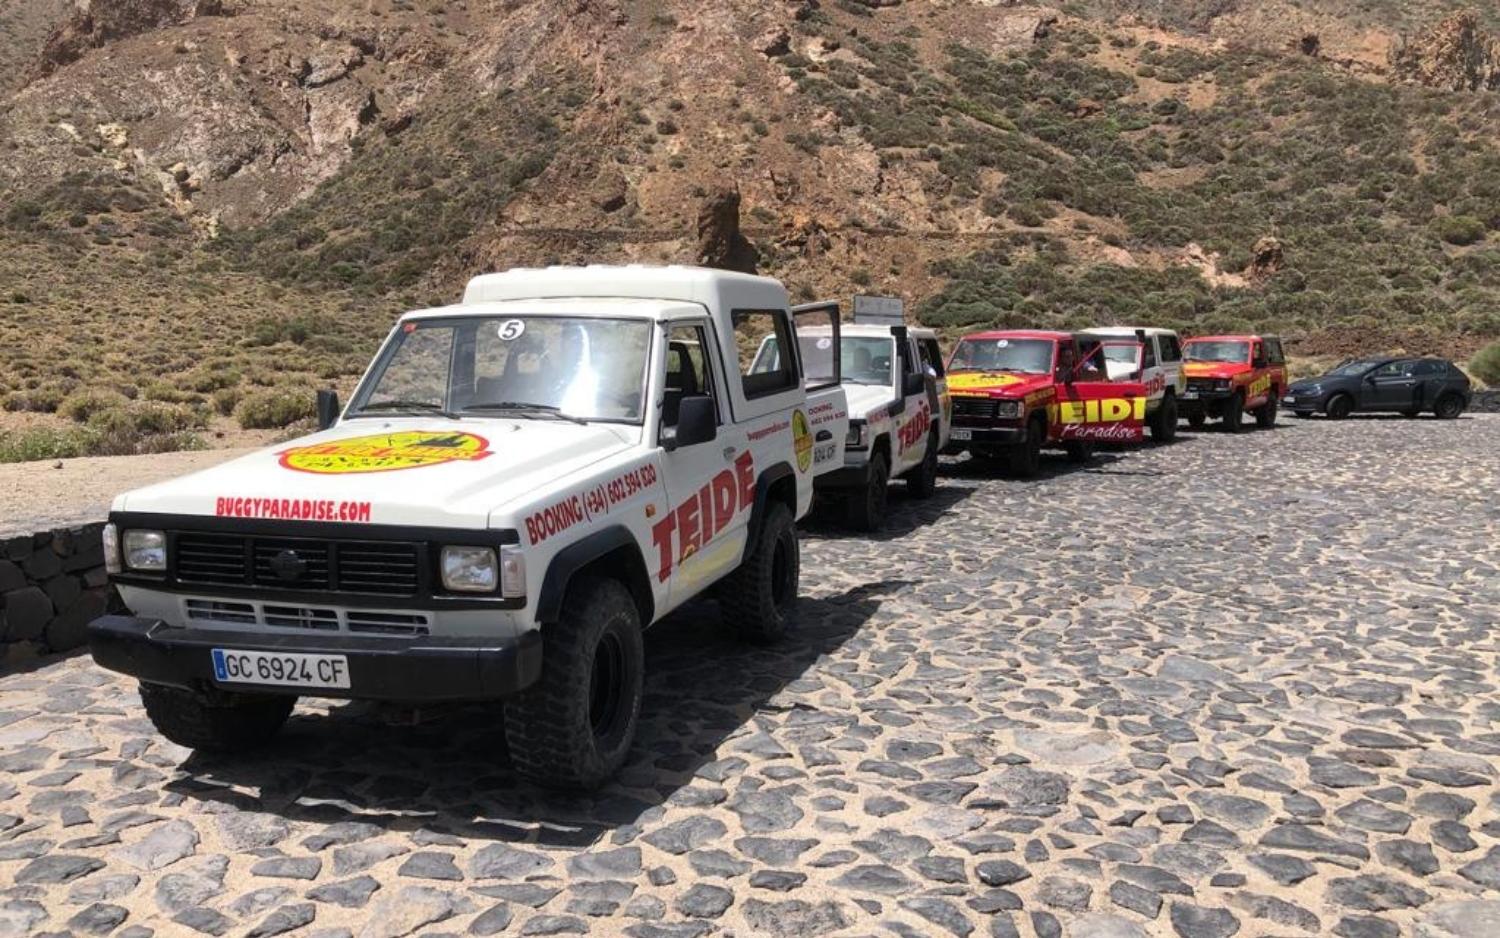 Rent a Jeep in Tenerife and go to Teide